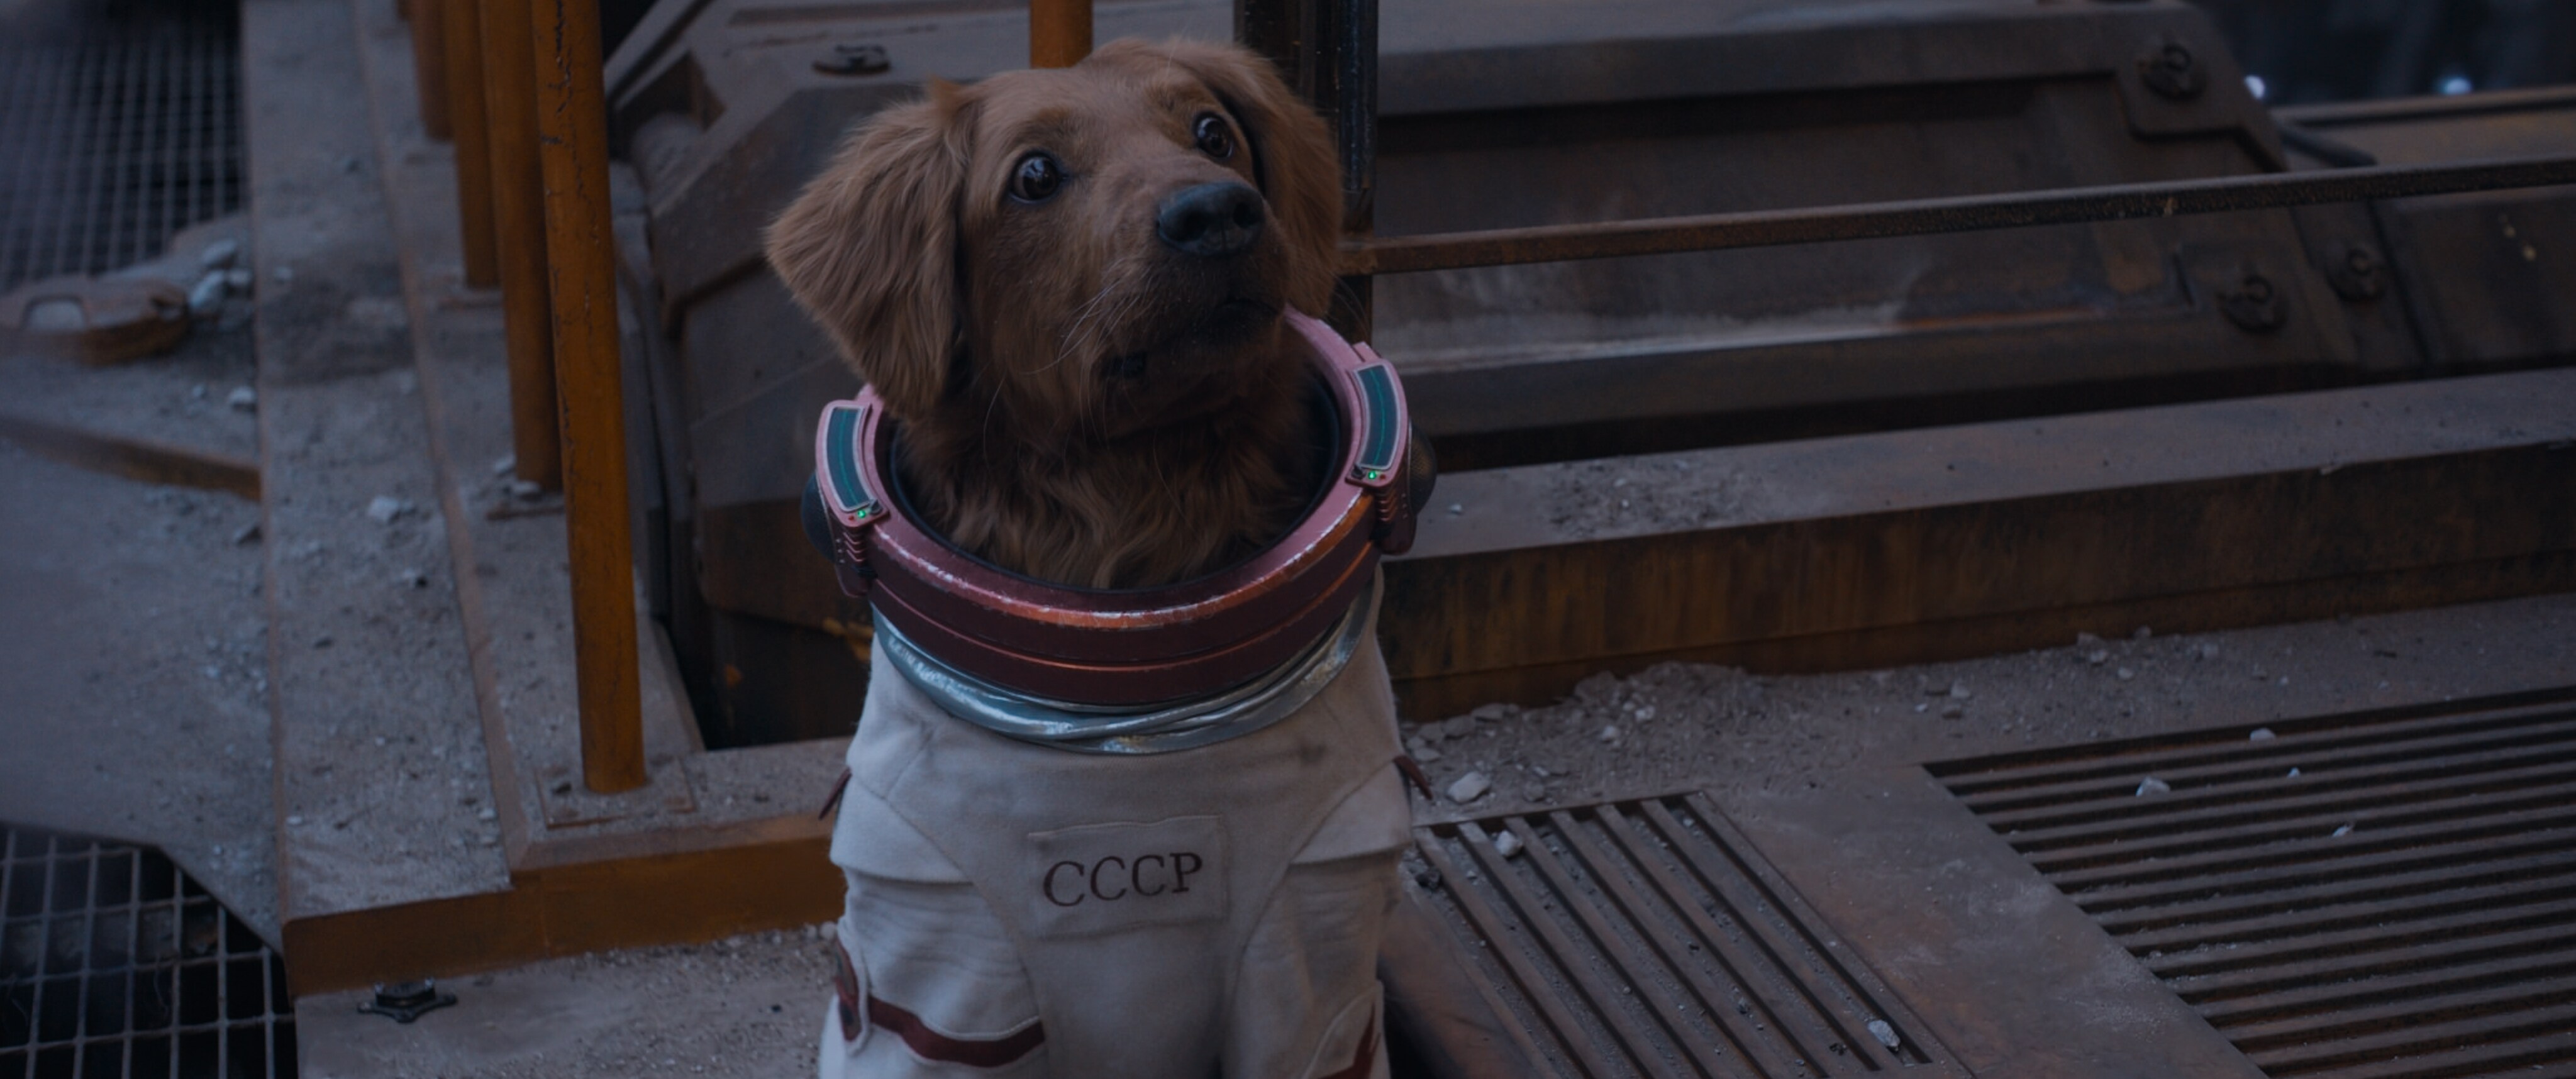 Cosmo the Spacedog (voiced by Maria Bakalova) looks up